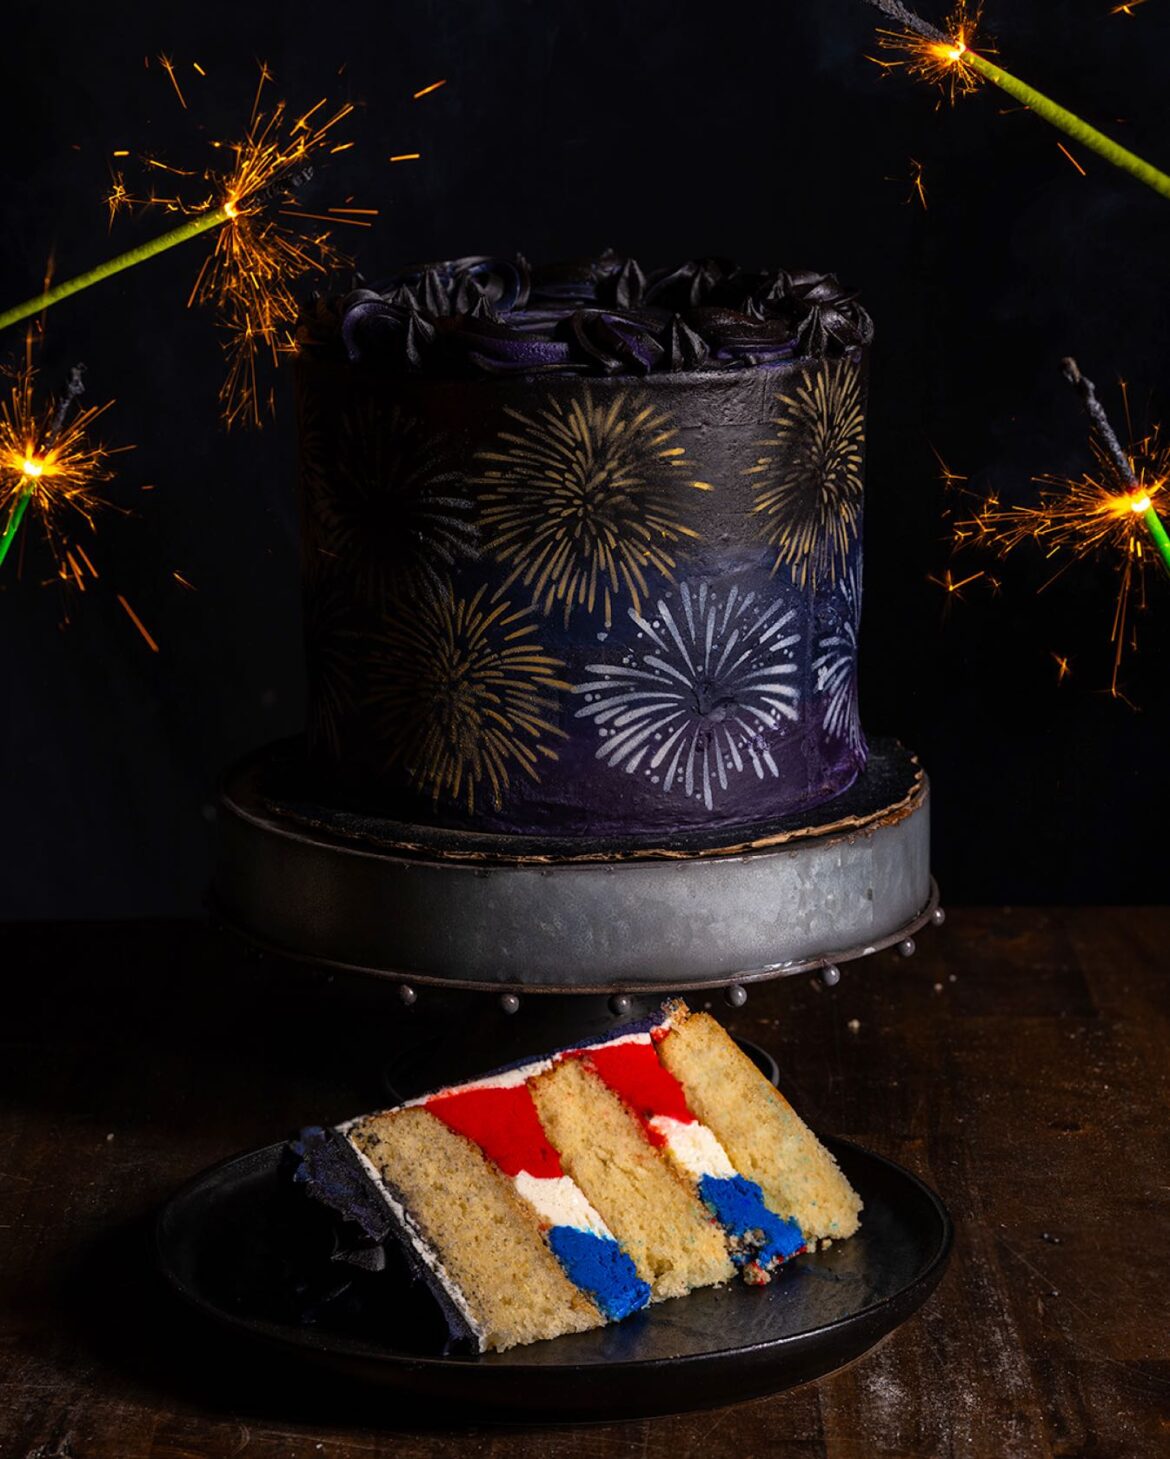 Gideon’s Bakehouse Celebrates the Fourth of July with Limited Edition Fireworks Cake